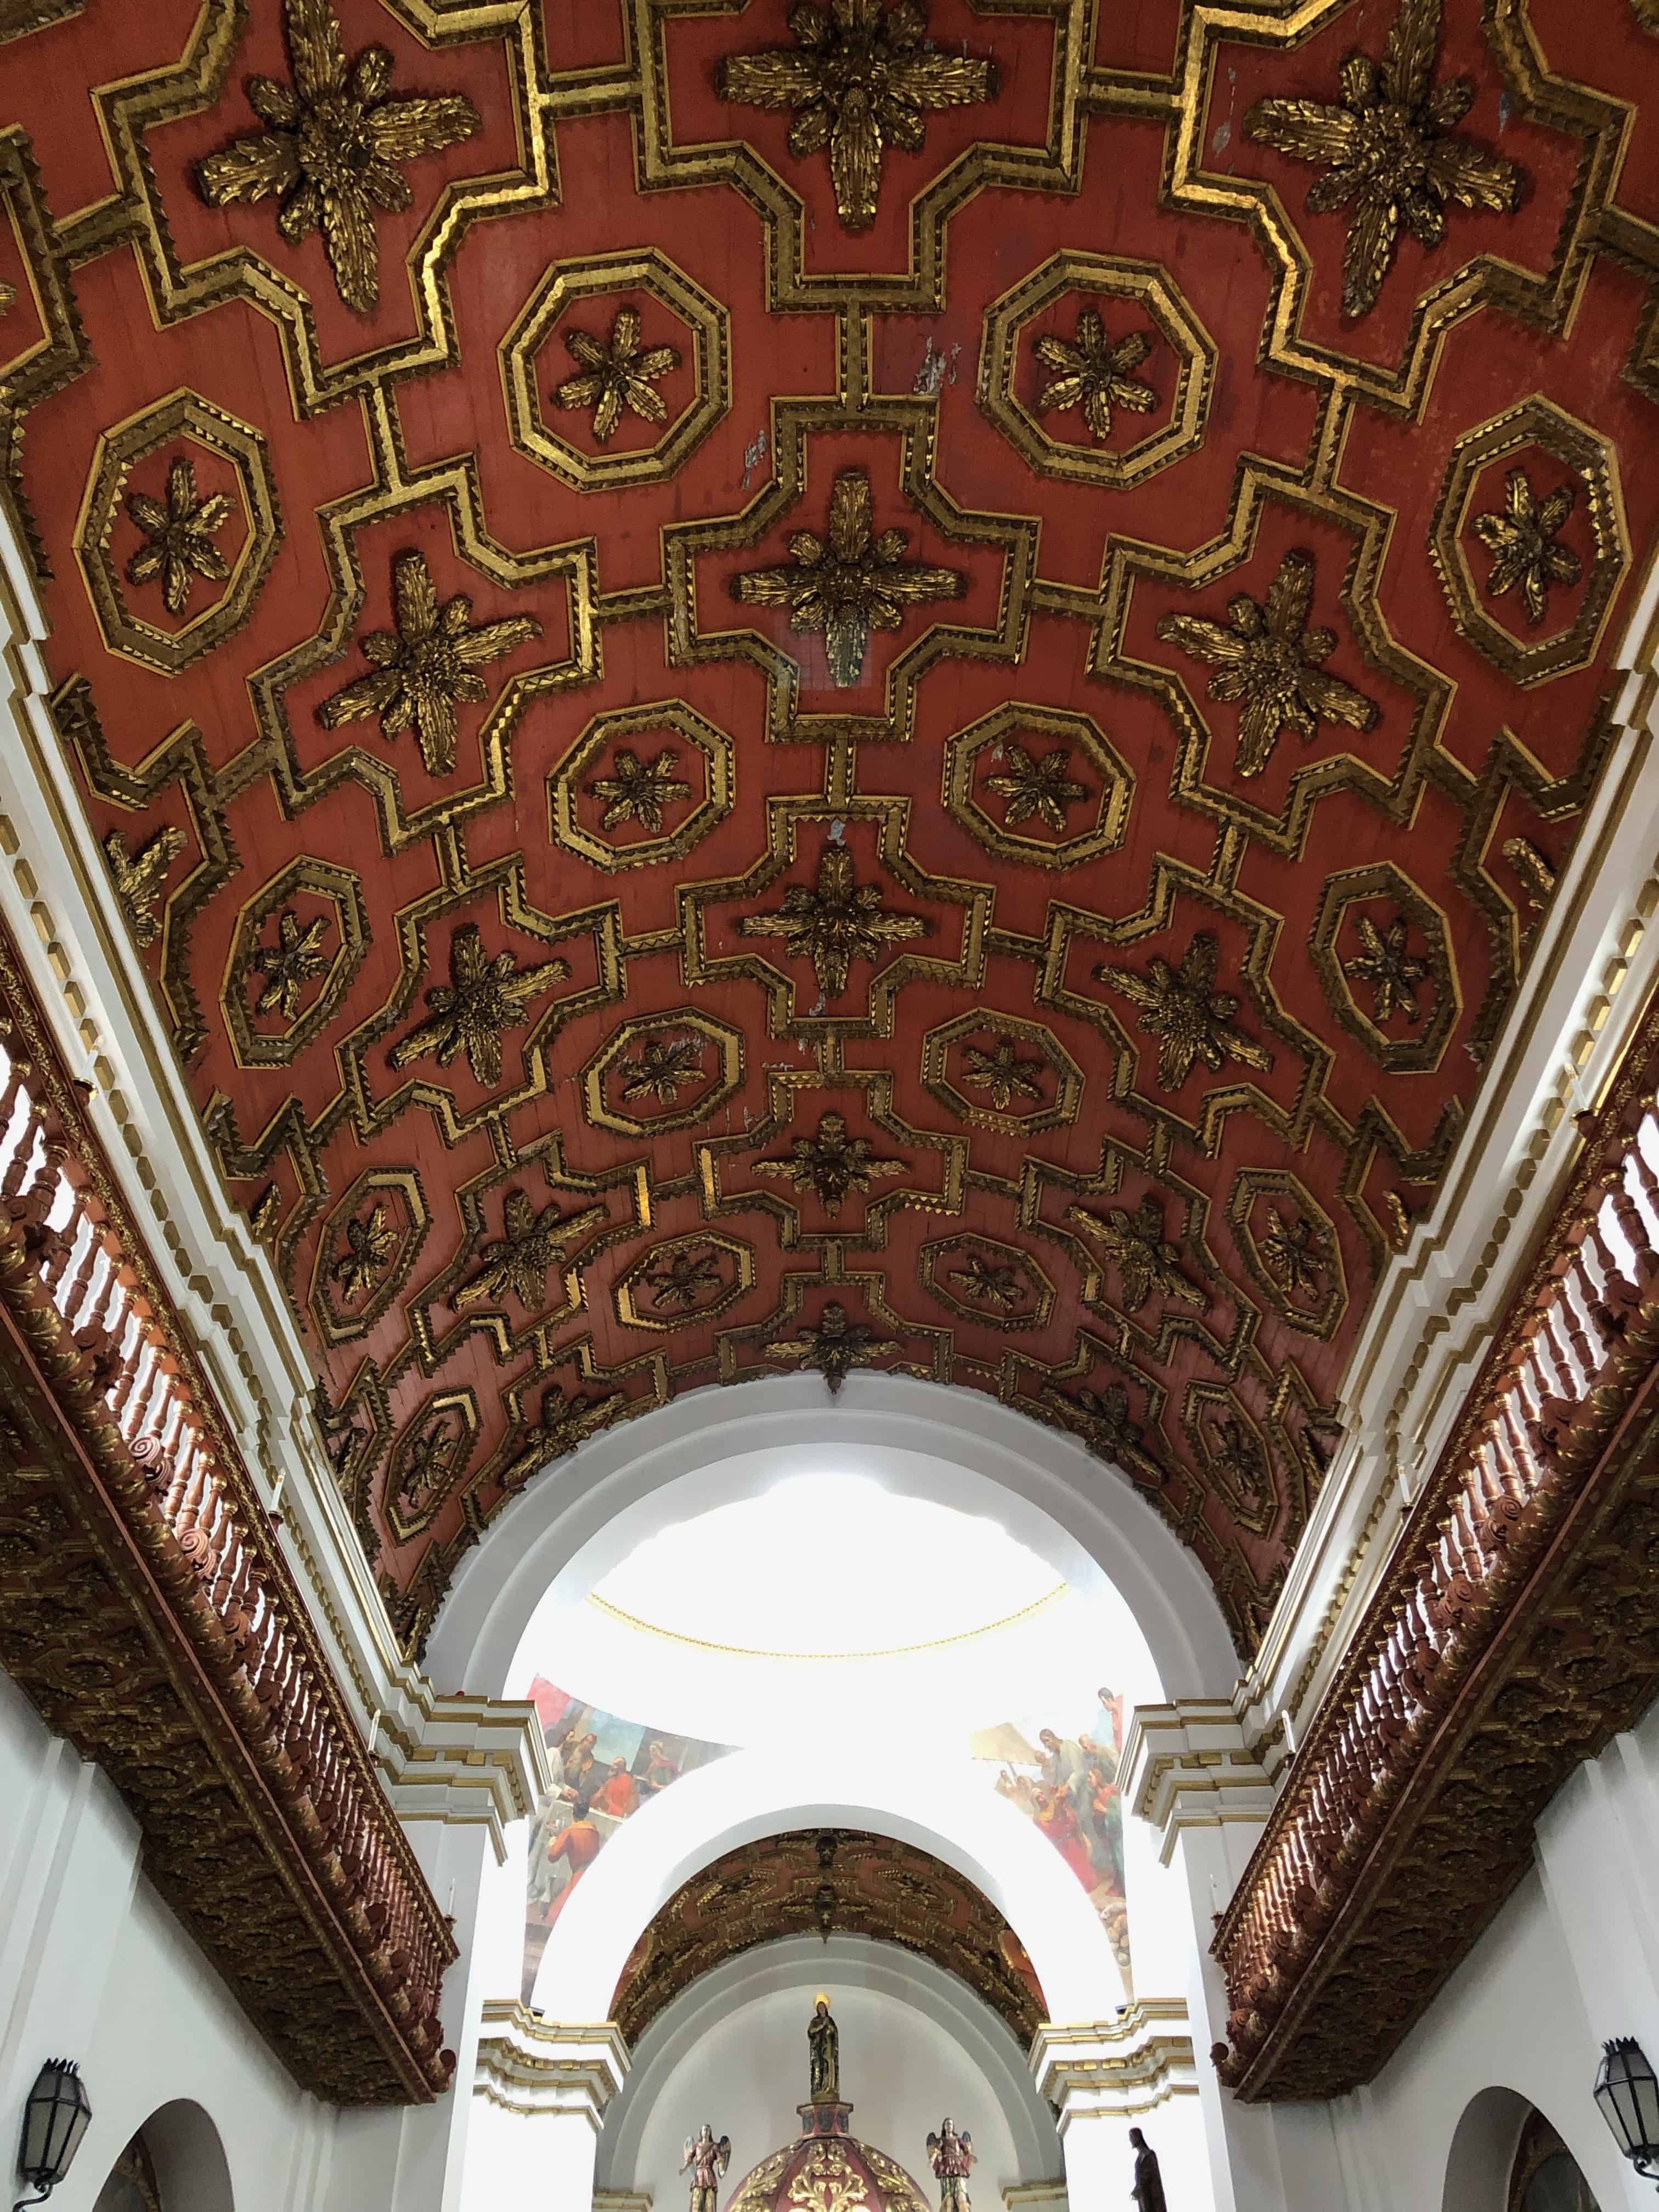 Ceiling in the Chapel of the Tabernacle in La Candelaria, Bogotá, Colombia